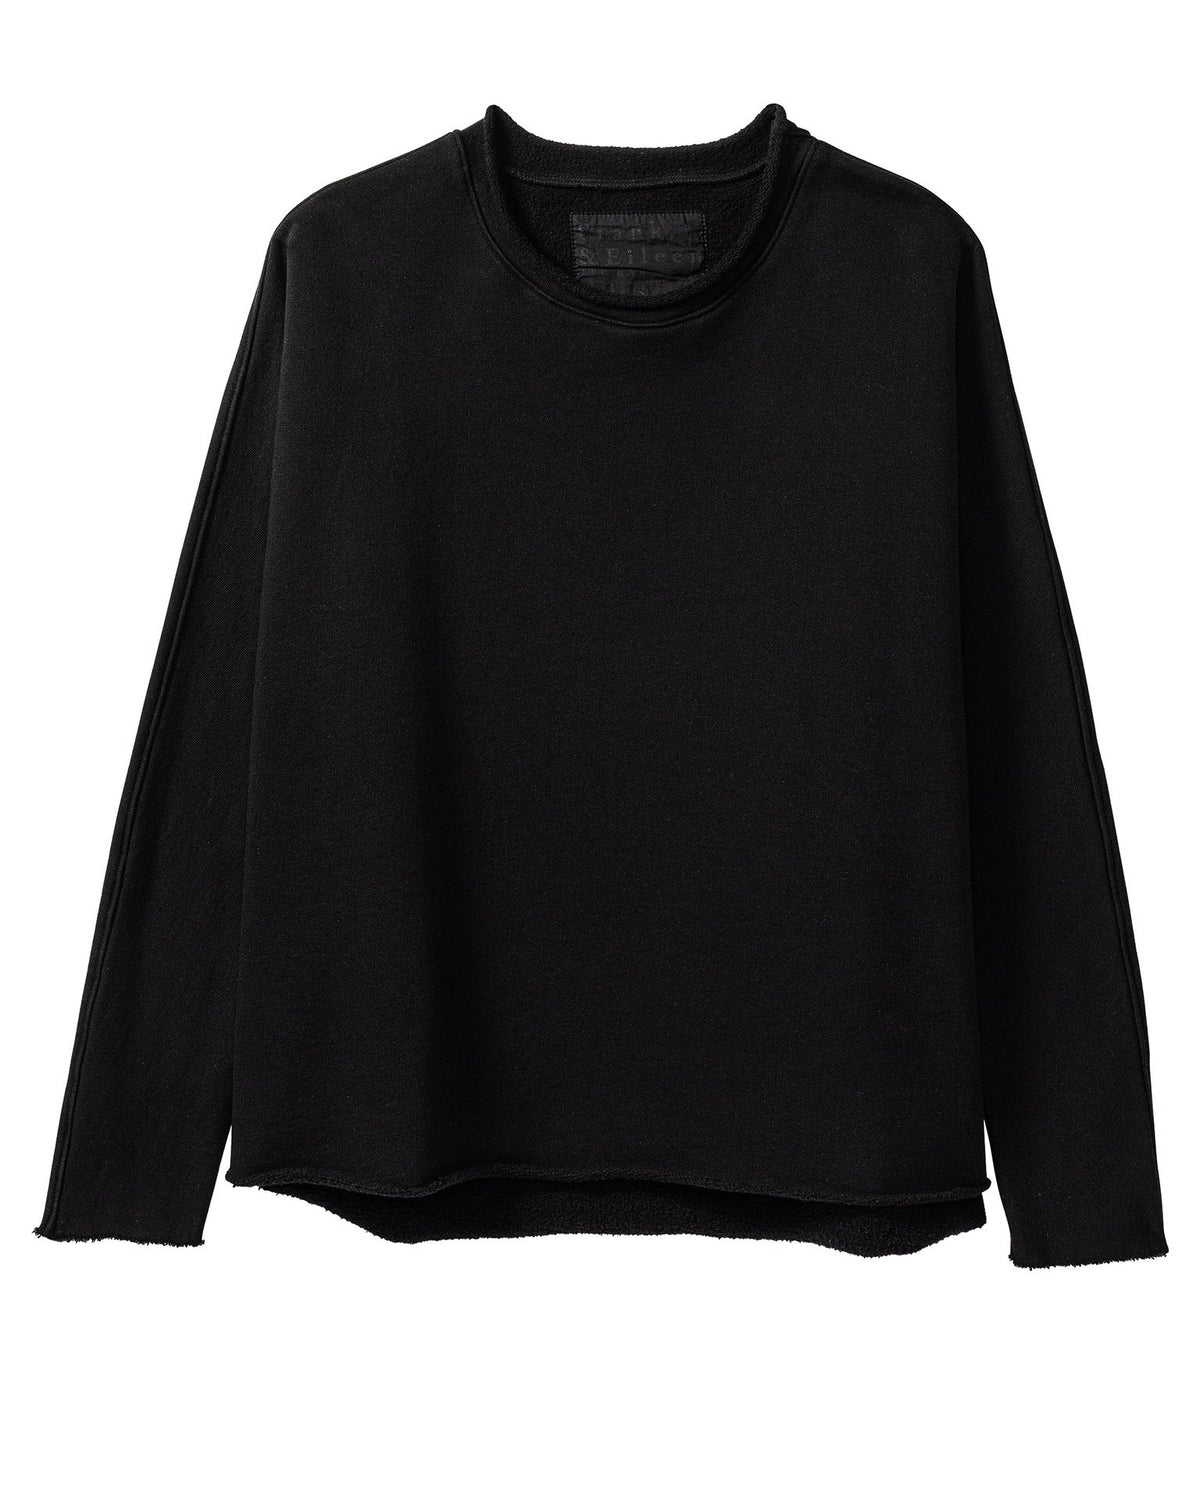 Tee Lab Clothing Long Sleeve Capelet in Black